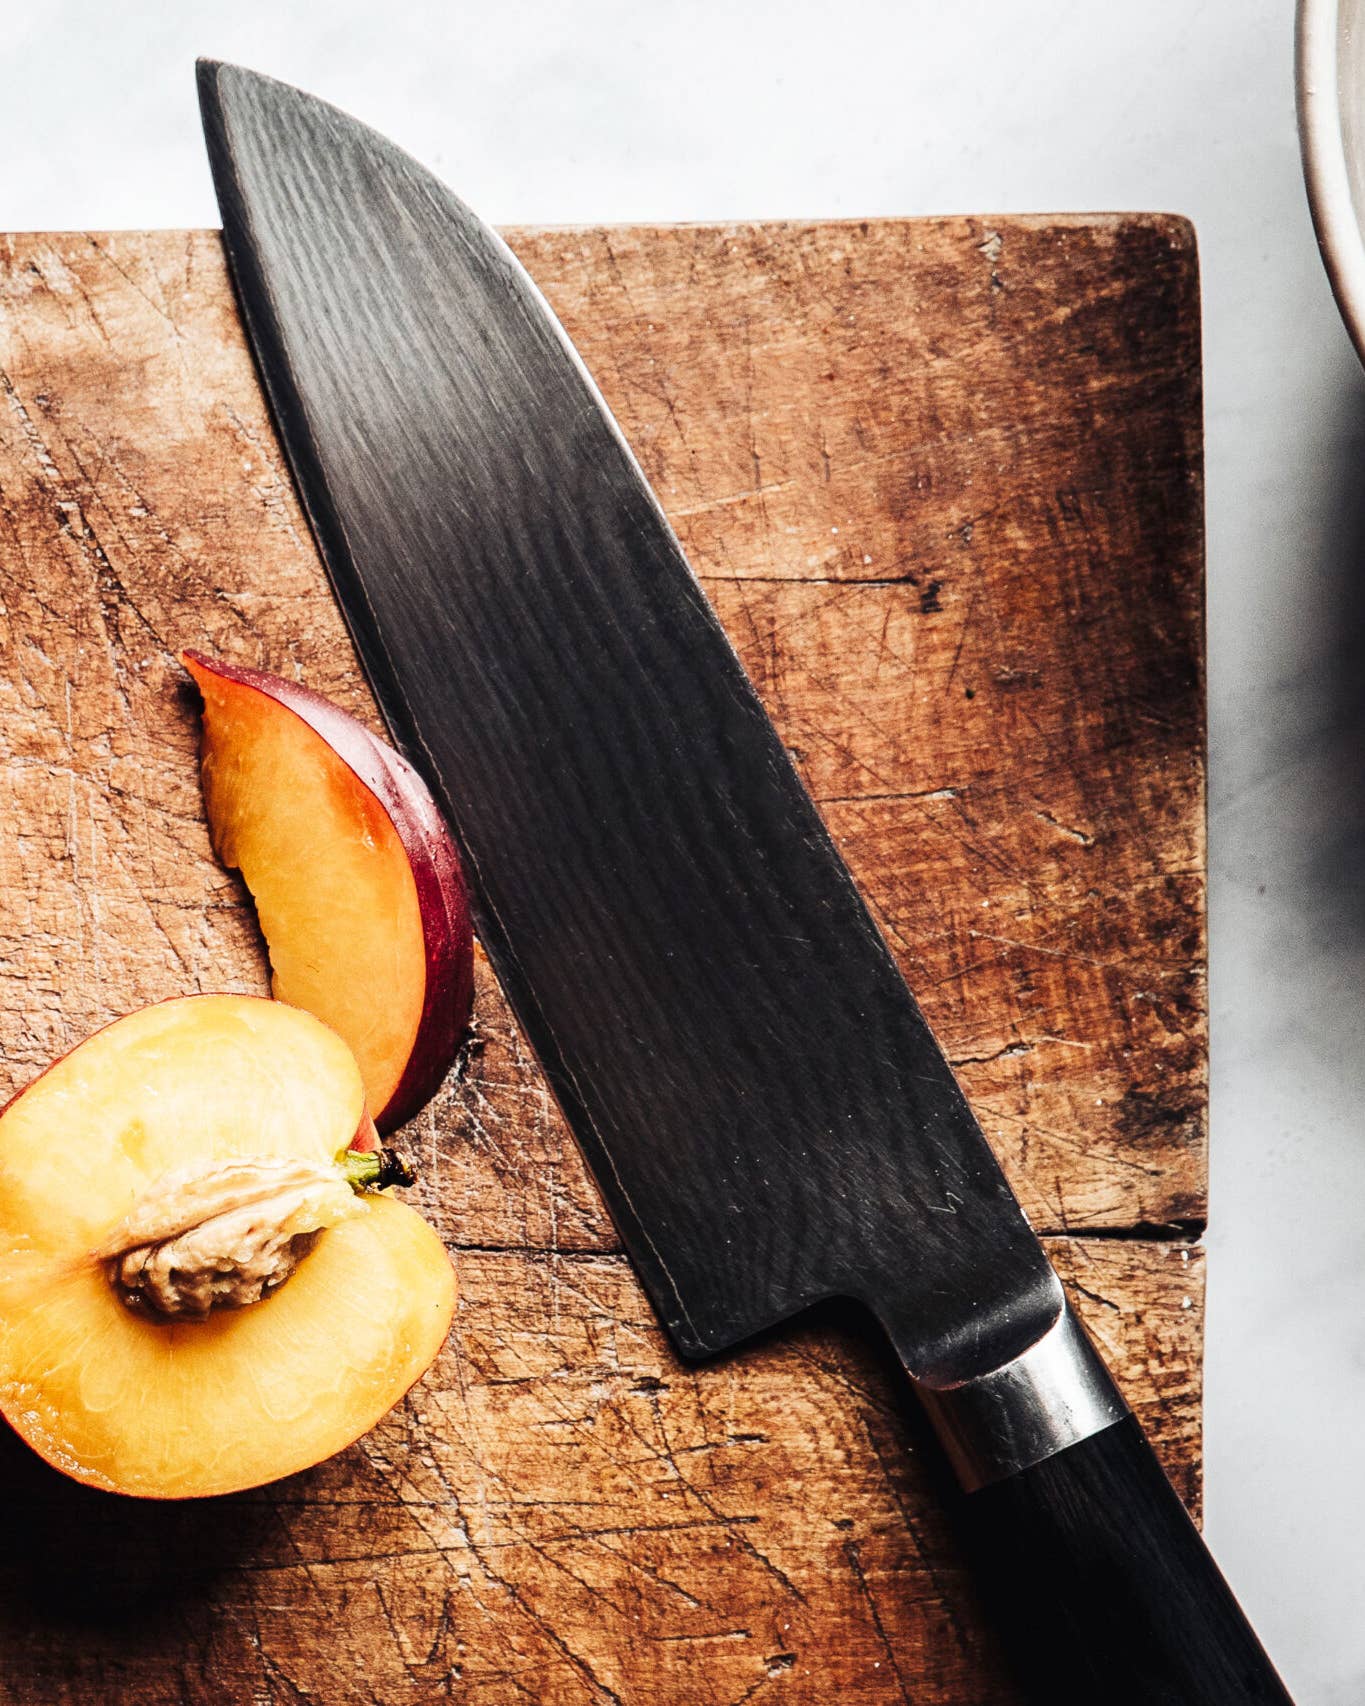 The Best Electric Knife Sharpeners For Blades Big and Small